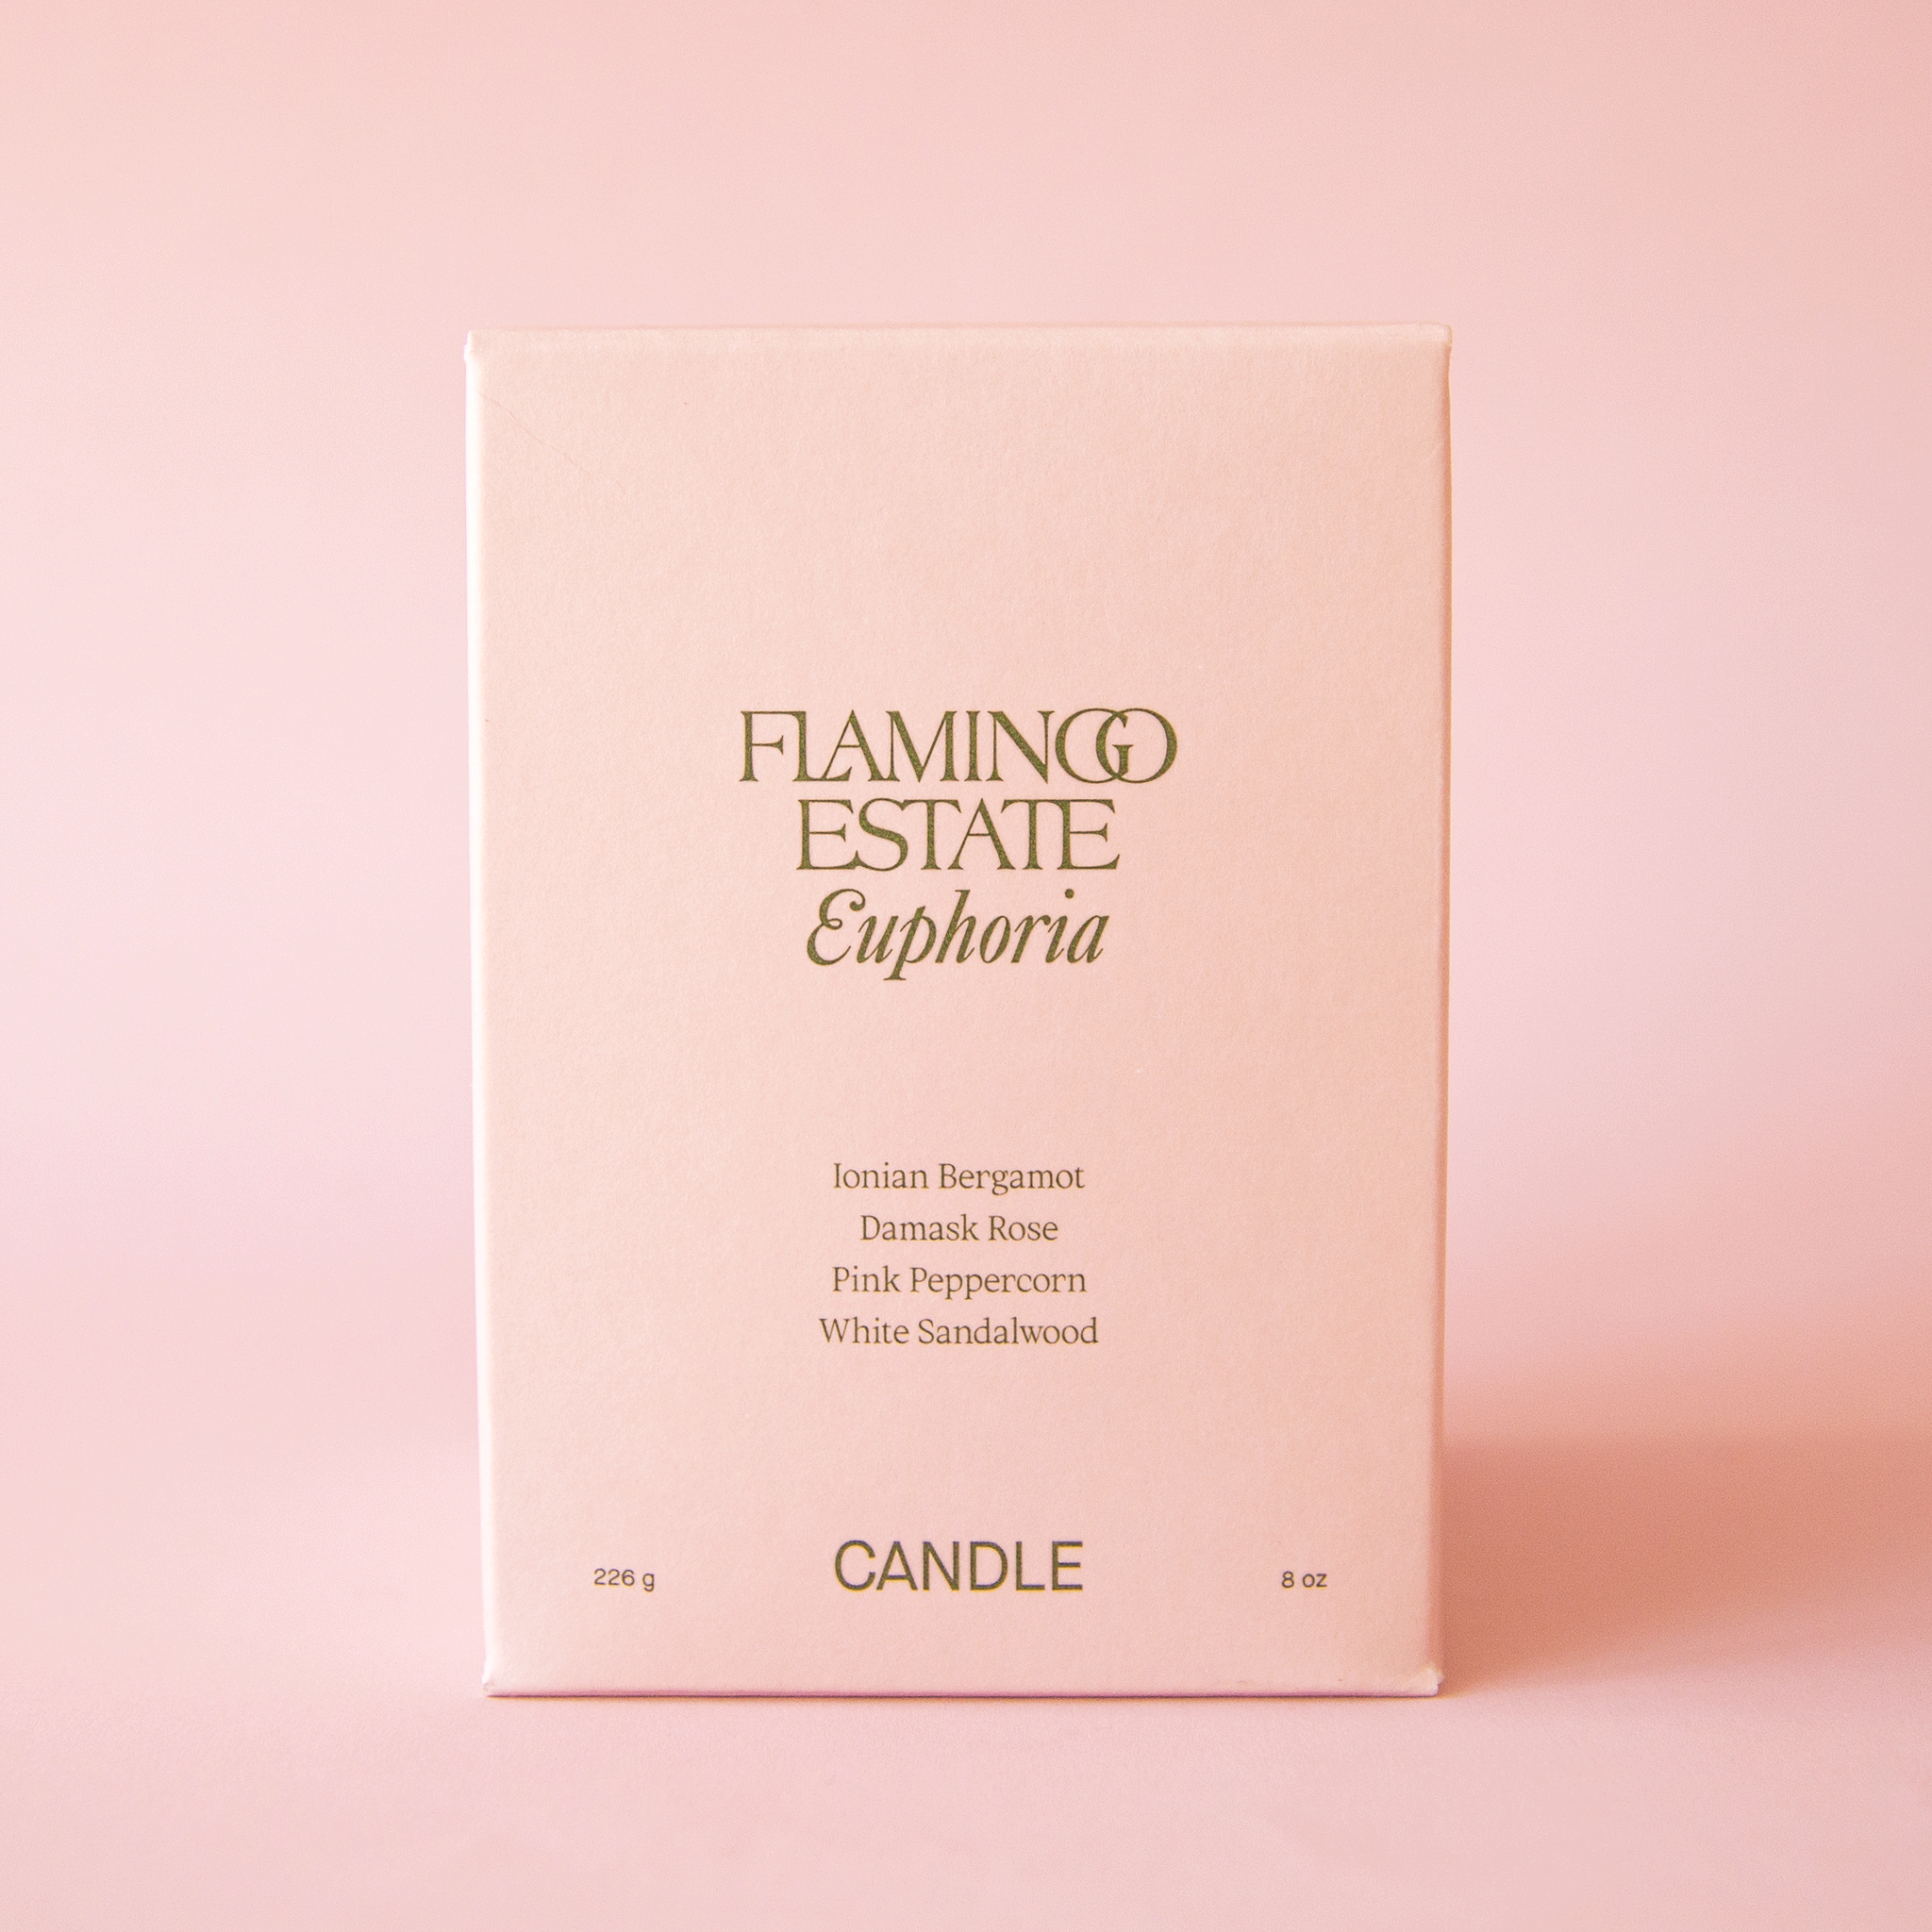 On a pink background is a light tan / pink box filled with a candle and text on the front that reads, &quot;Flamingo Estate Euphoria Candle&quot;. 